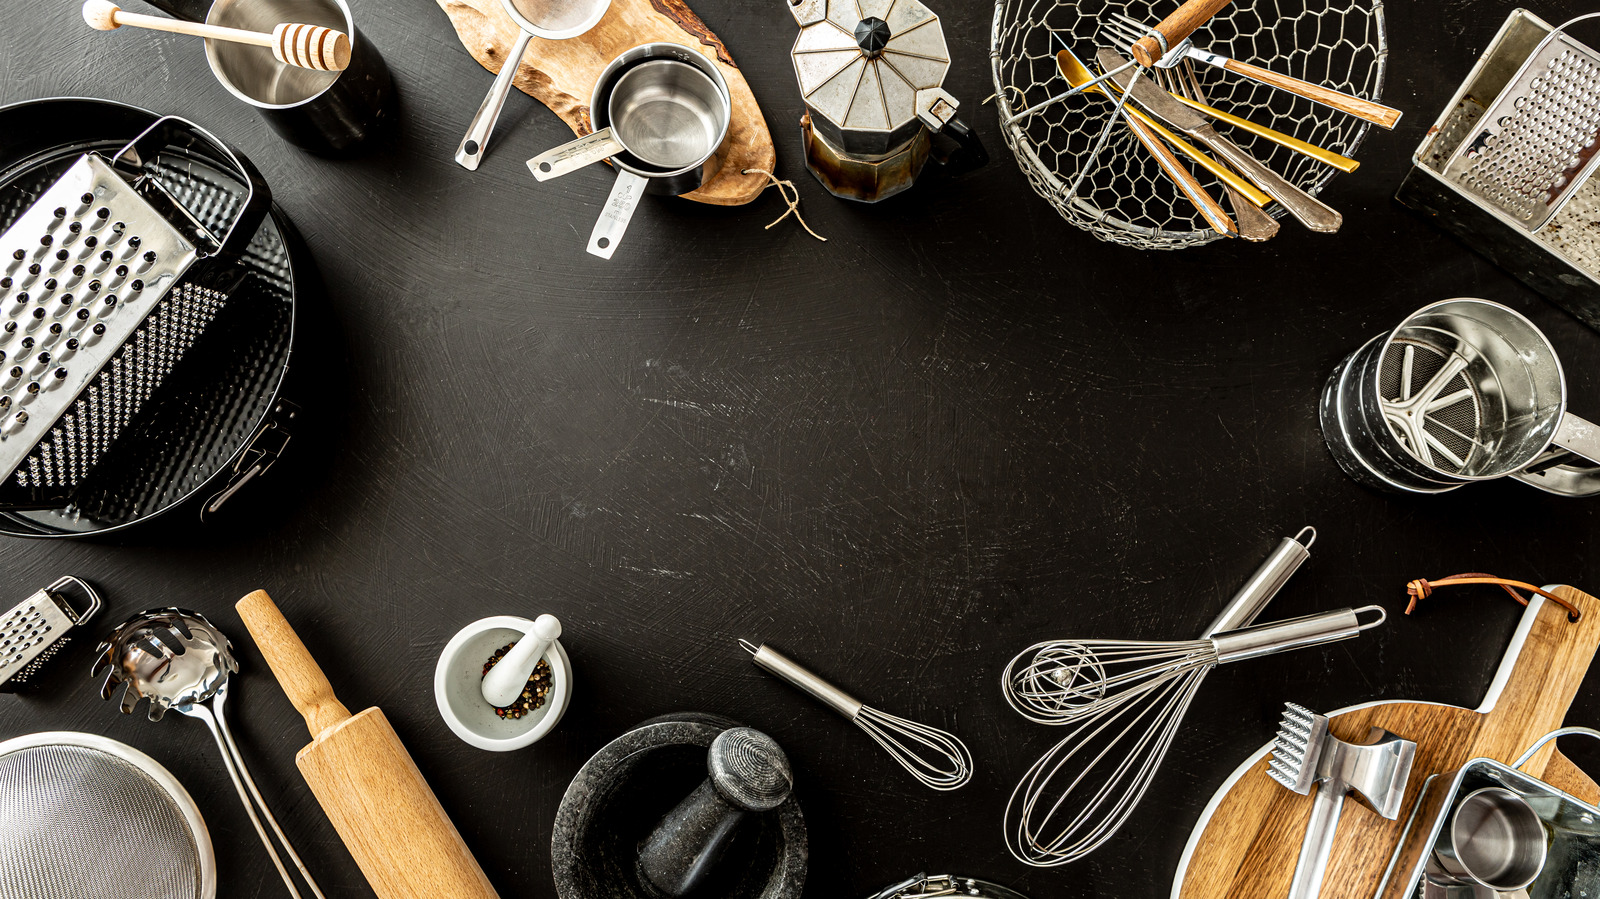 Can You Identify All Of These Kitchen Tools And Gadgets